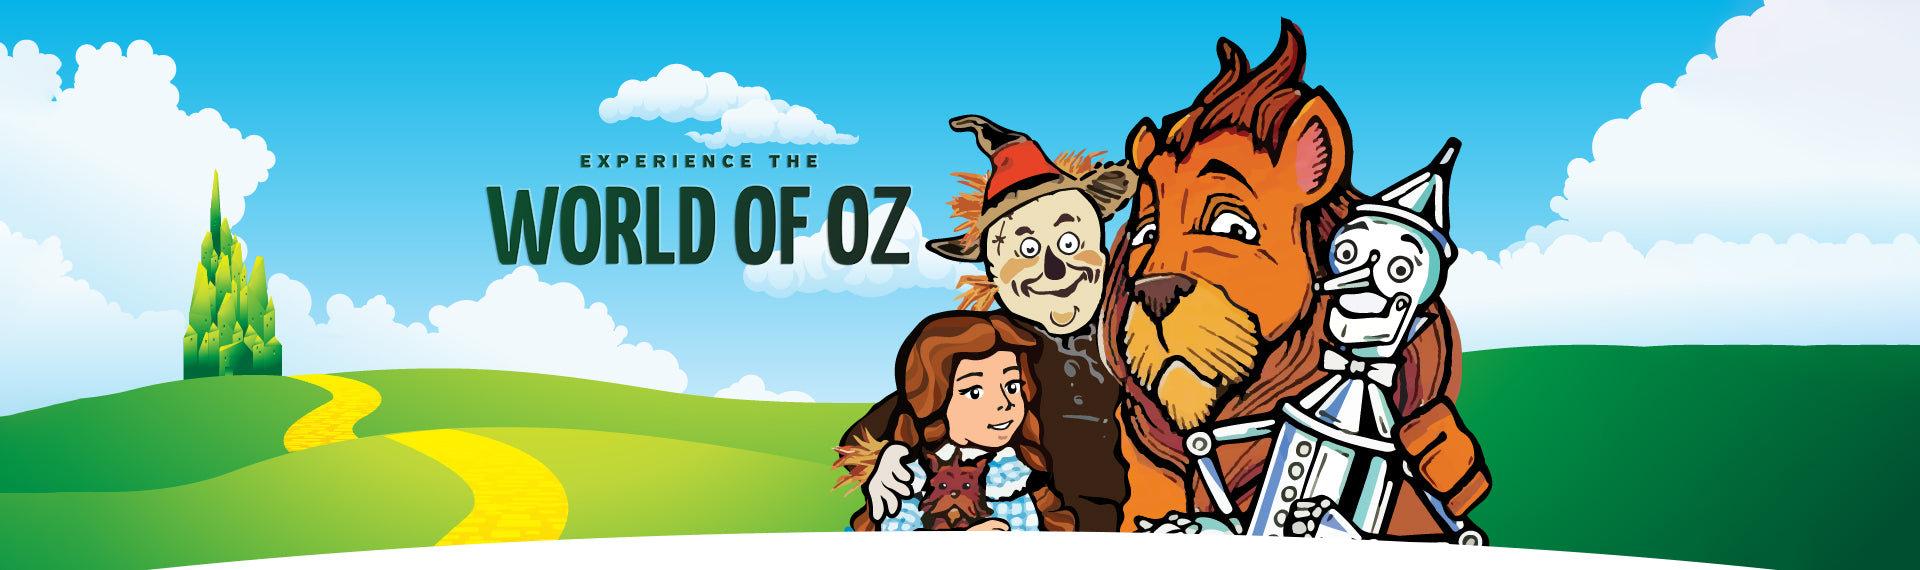 Experience the World of OZ